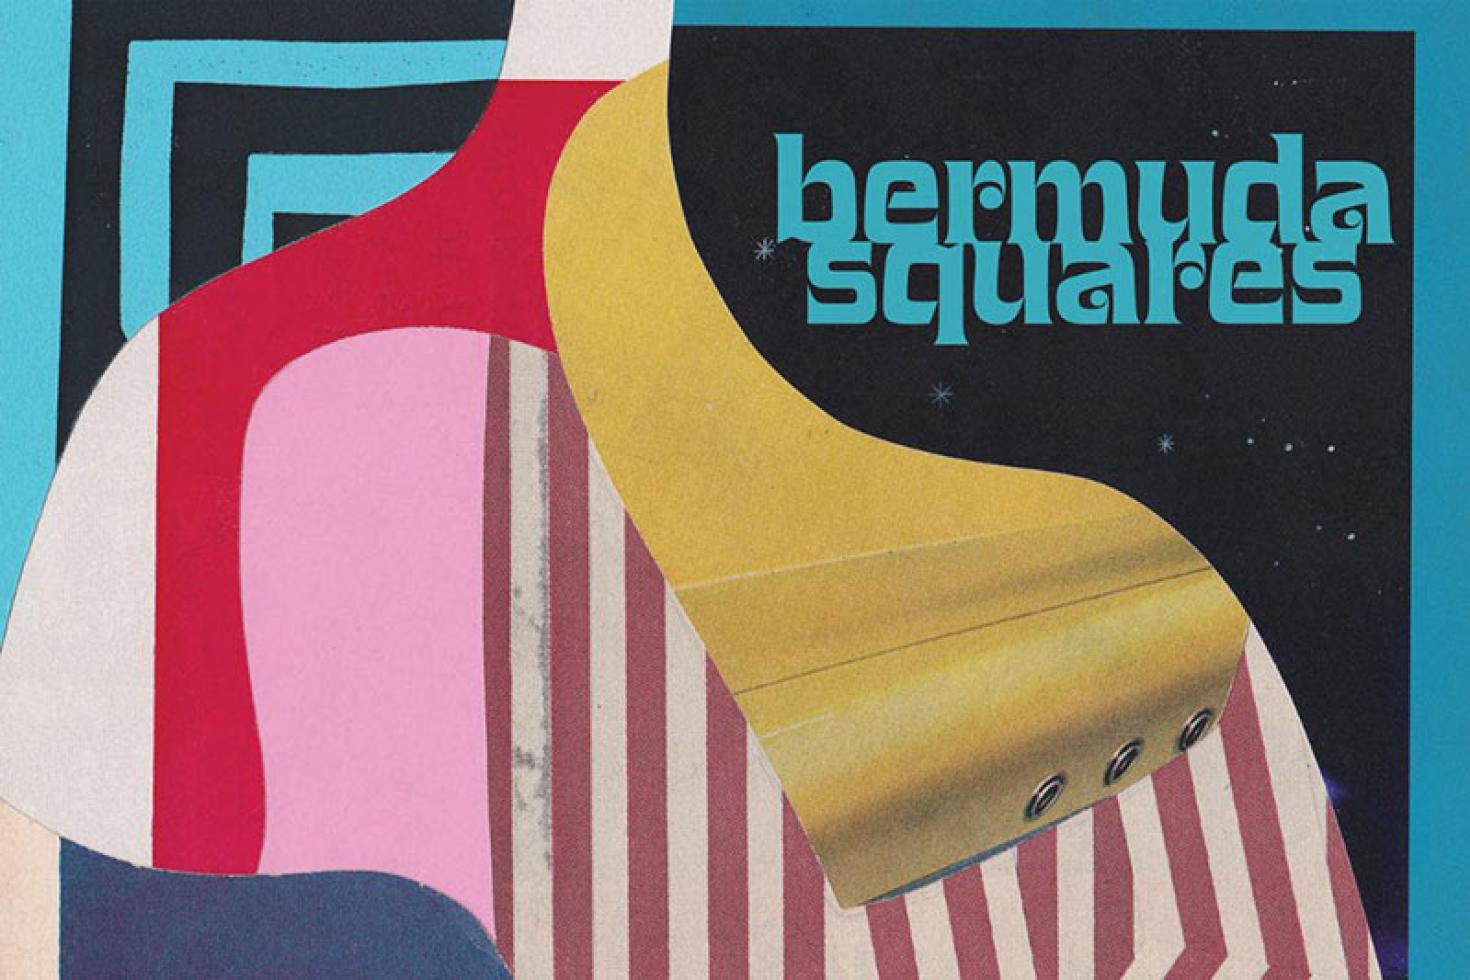 Bermuda Squares share new single from debut album